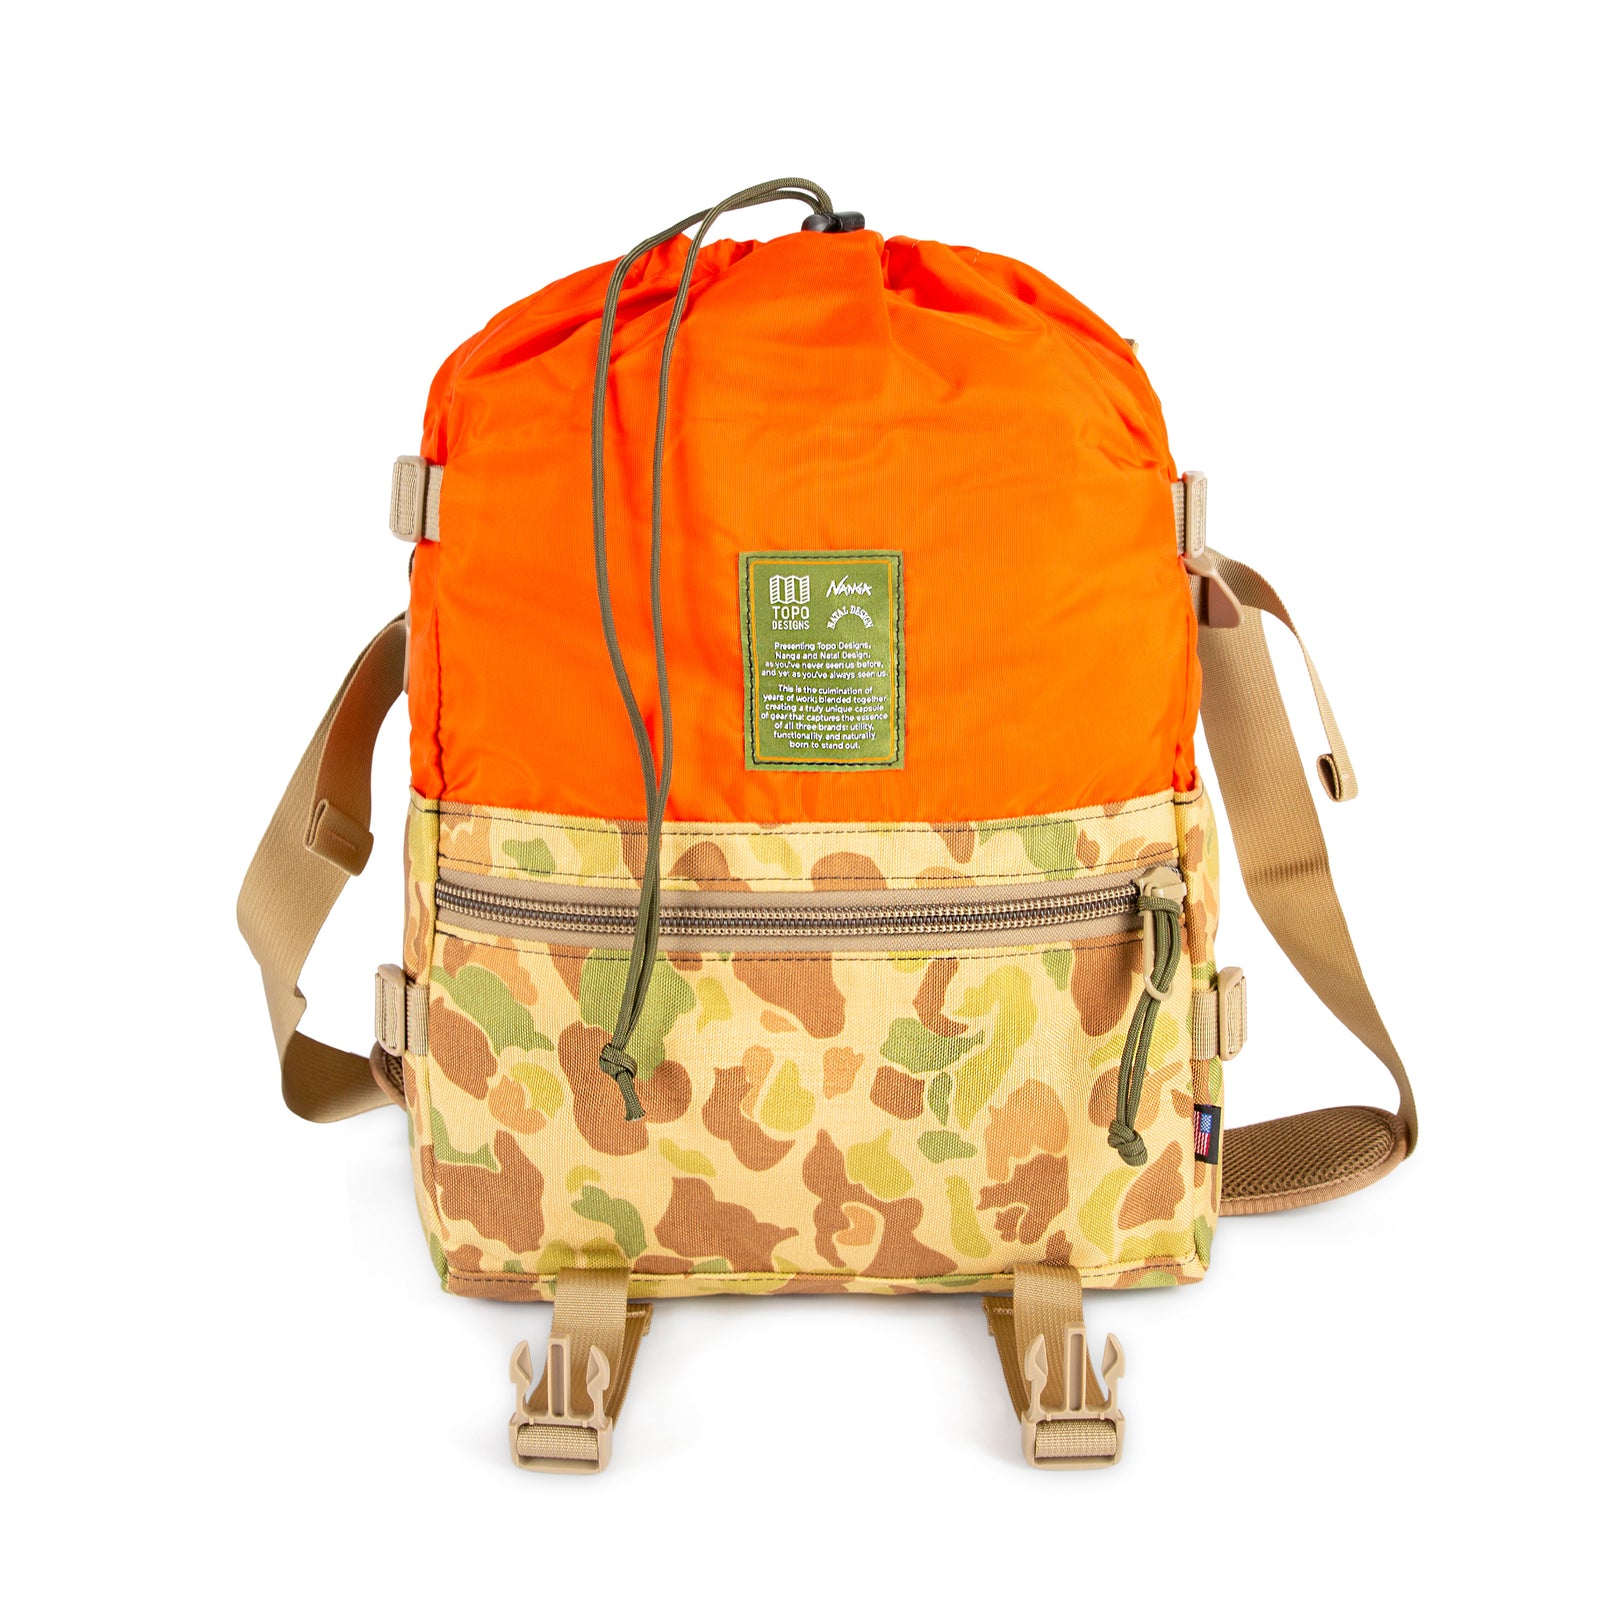 Front product shot of Topo Designs x Nanga x Natal Designs Rover Shoulder Bag in Camo with top flap open showing orange drawstring main compartment.